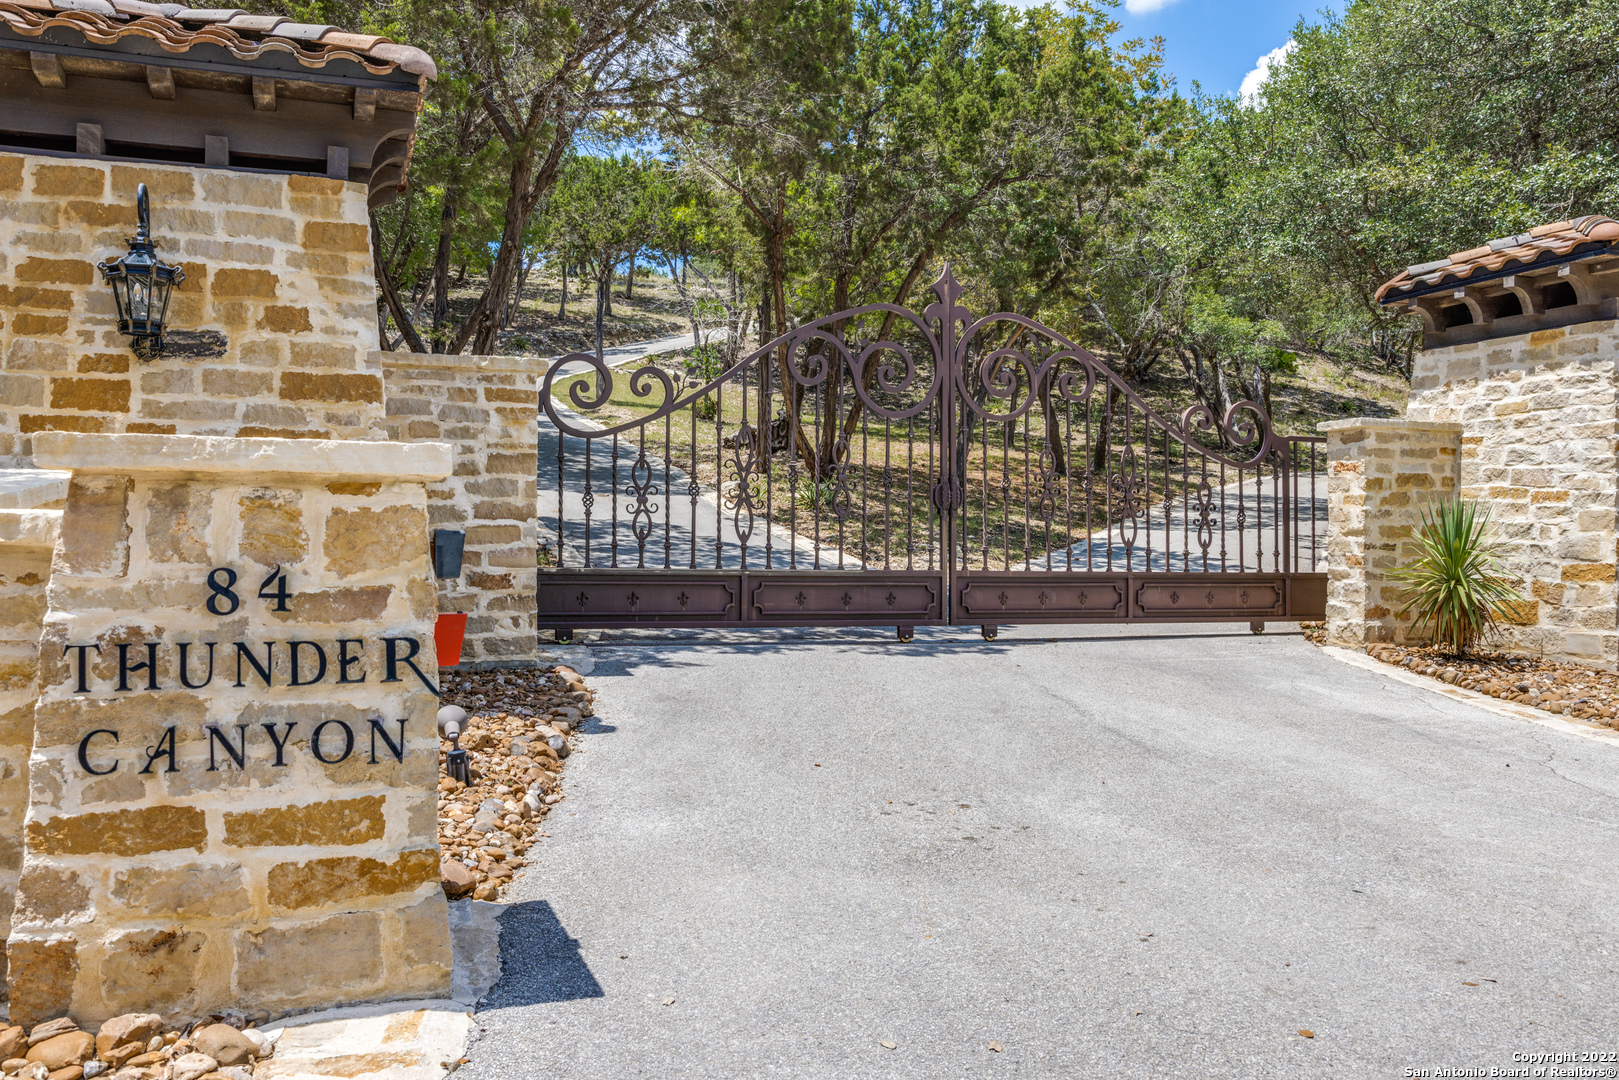 Spectacular Hill Country views from this Elegant, Privately Gated and Secluded 9.29 Acre Estate.  Once in Estancia you will fall in love with the hill country charm.  Enter the estate through the wrought iron gates, follow the road to the top of the hill and you will be met with a view of the city and this exquisite home.  The double wrought iron doors will welcome you in and you will be able to see the breath-taking views from most every room of the house.  The chef's kitchen with professional chef's grade stainless steel appliances, island and sitting/serving bar for 8 open to the family room by a stone archway. The family room boast floor-to-ceiling fireplace, wall of windows allowing an abundance of natural light, gorgeous ceiling treatment, stunning wood floors and a wrought iron gated wine cellar/storage.  3-spacious secondary bedrooms, all with en-suite bathroom and walk-in closets. Secluded game room with windows and a large sliding glass entrance to the outdoor patio. 3-car garage with extra storage. The private north wing offers a spacious primary bedroom with hill country views and its own access to the outdoor oasis.  The split floorplan allows options with a study/nursery or secondary bedroom to be part of the north wing.  Double vanity, oversized walk-in closet, luxury shower and spa tub make this en-suite a five-star experience.  Make a splash in the infinity edge pool & spa in the resort-style outdoor paradise or just relax on the large, covered patio overlooking the spectacular panoramic views of the hill country.  Estancia offers ag. exemption plus 50,000 sq ft covered equestrian center, gym, workout room, skeet range, 3 par 3 practice golf holes, 5-acre fishing lake, covered pavilion & a kitchen, gas grills & fireplace. Just minutes to Boerne, restaurants, shopping, hospitals and airport.